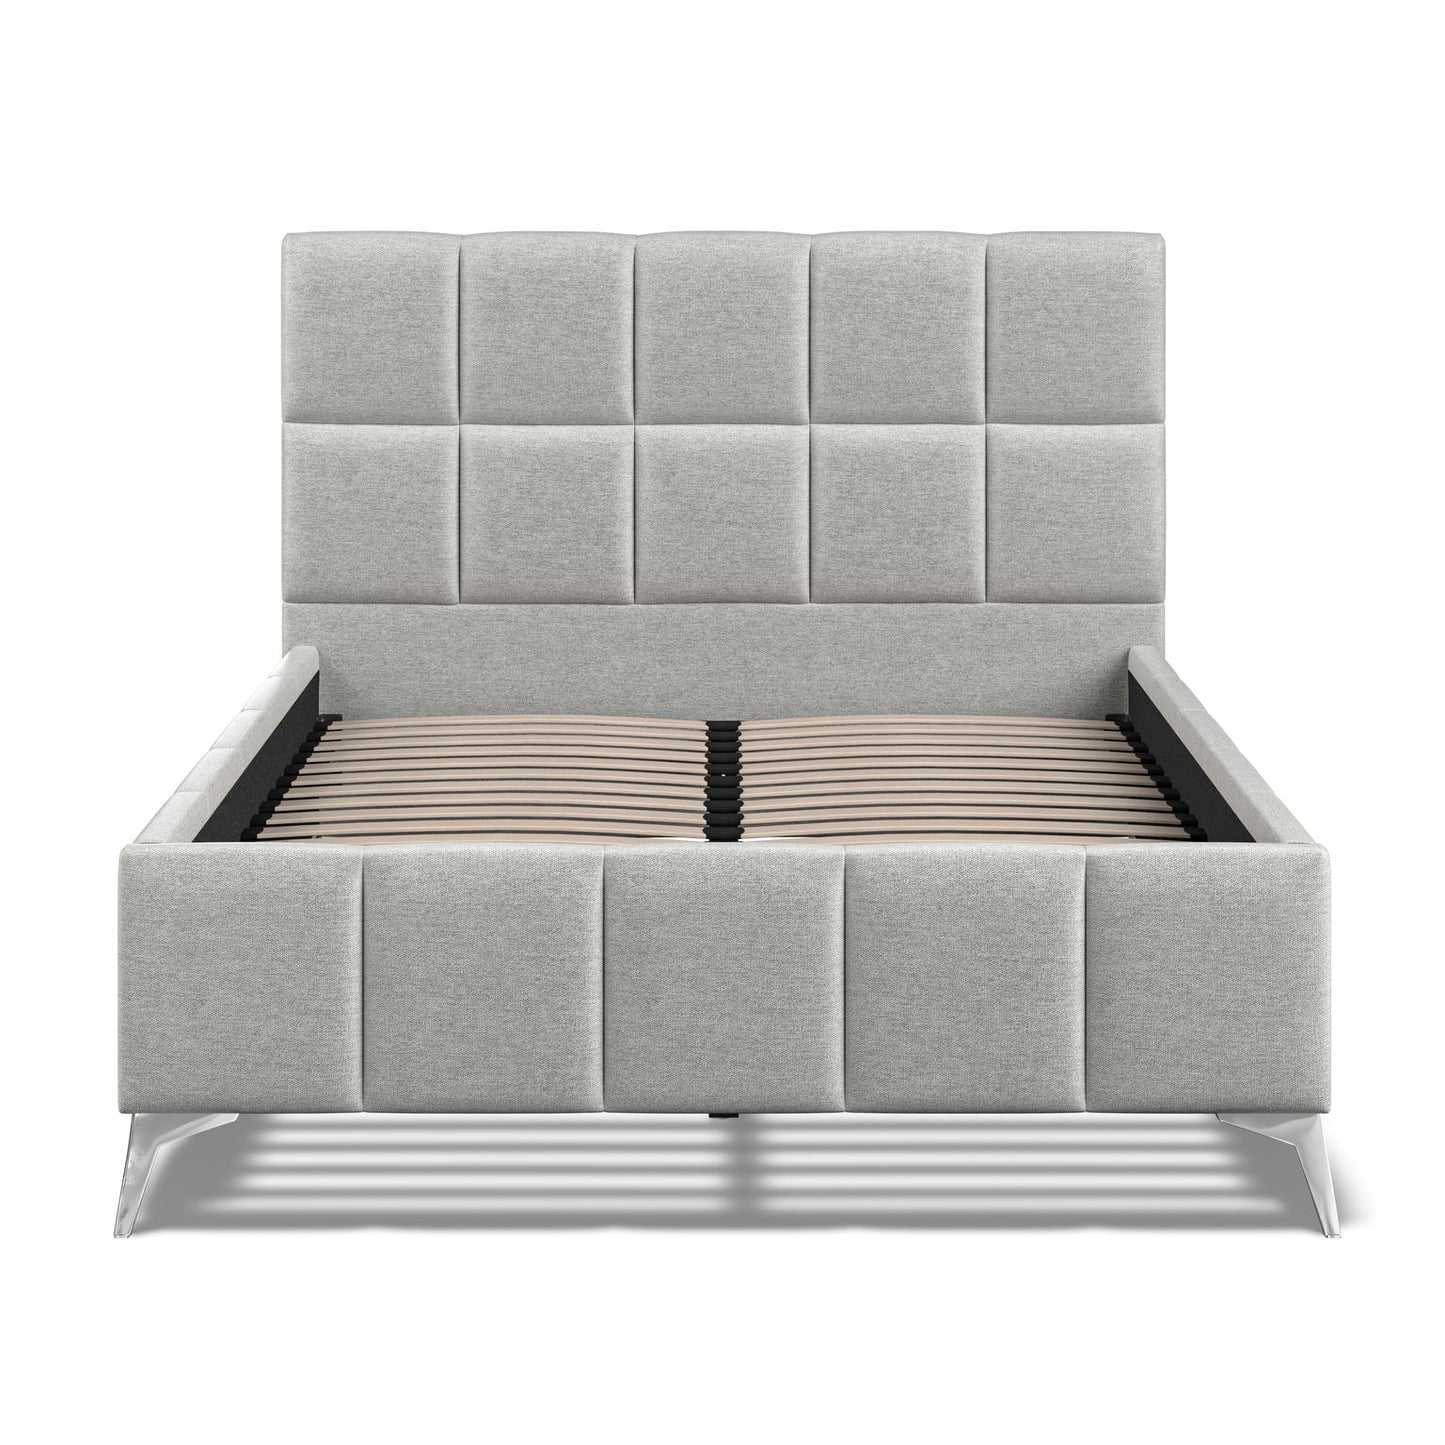 The Bed Collection Cube Grey Linen Bed Frame